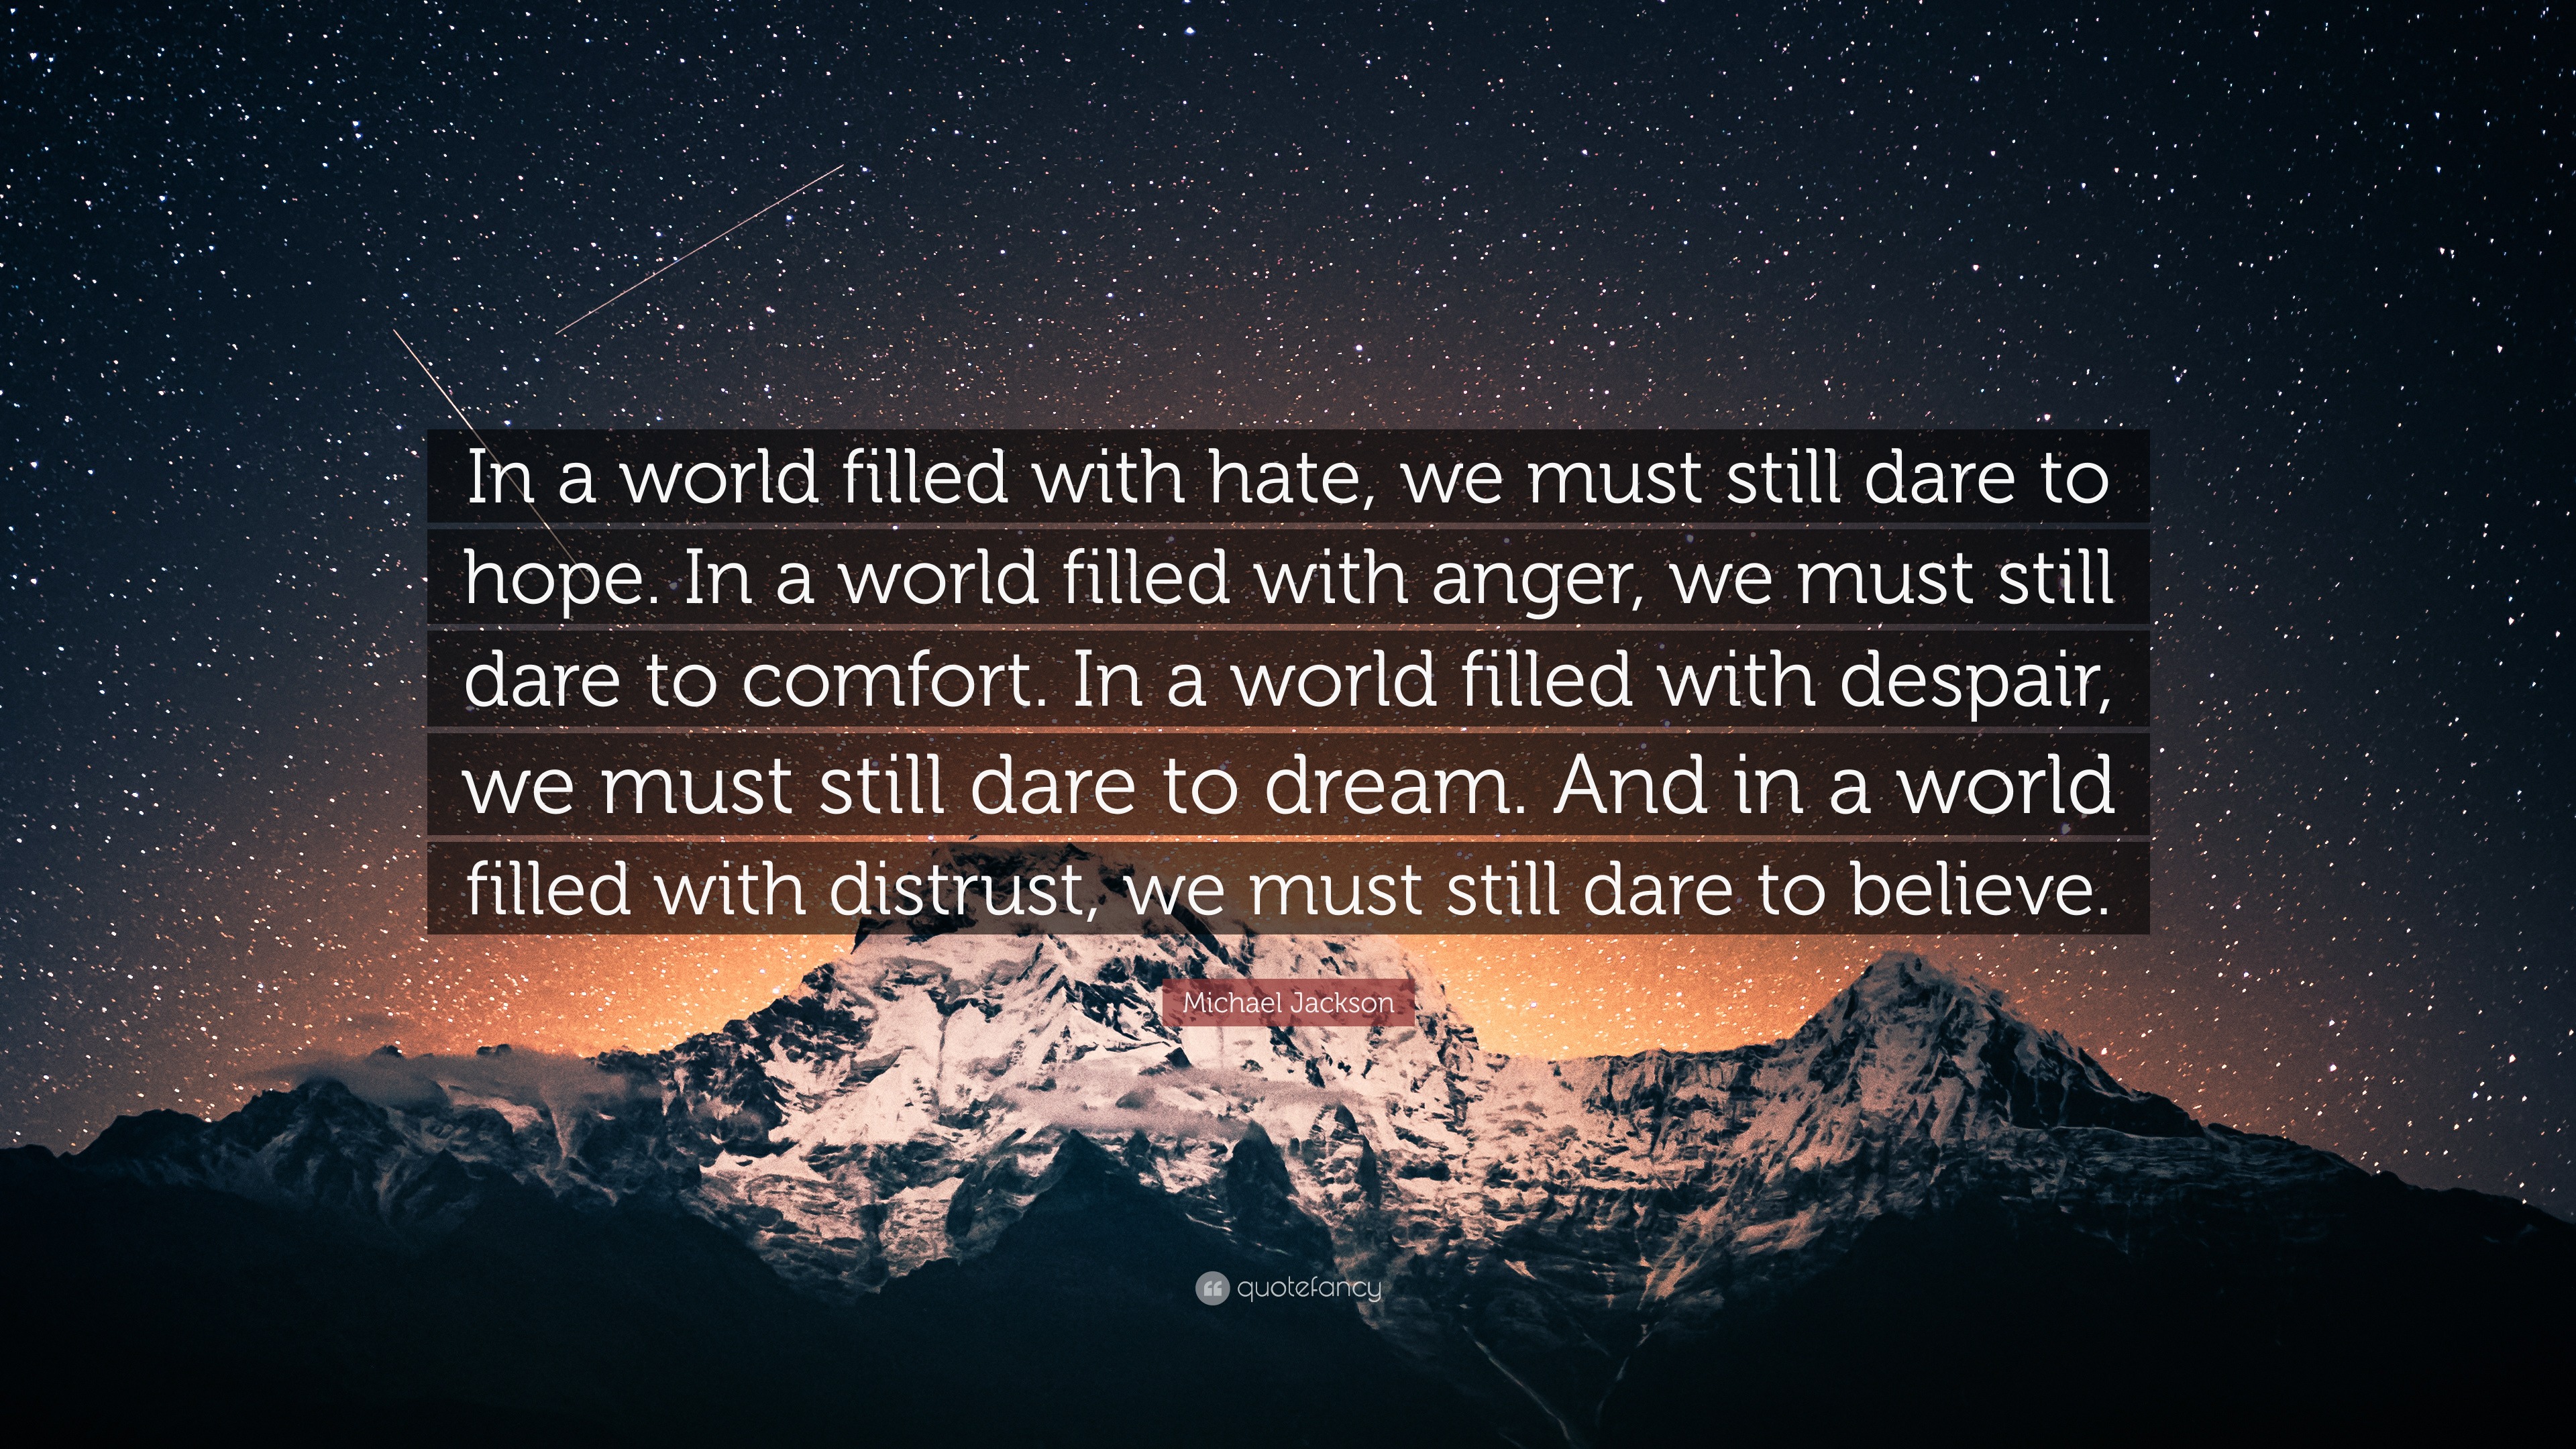 Michael Jackson Quote: "In a world filled with hate, we must still dare to hope. In a world ...